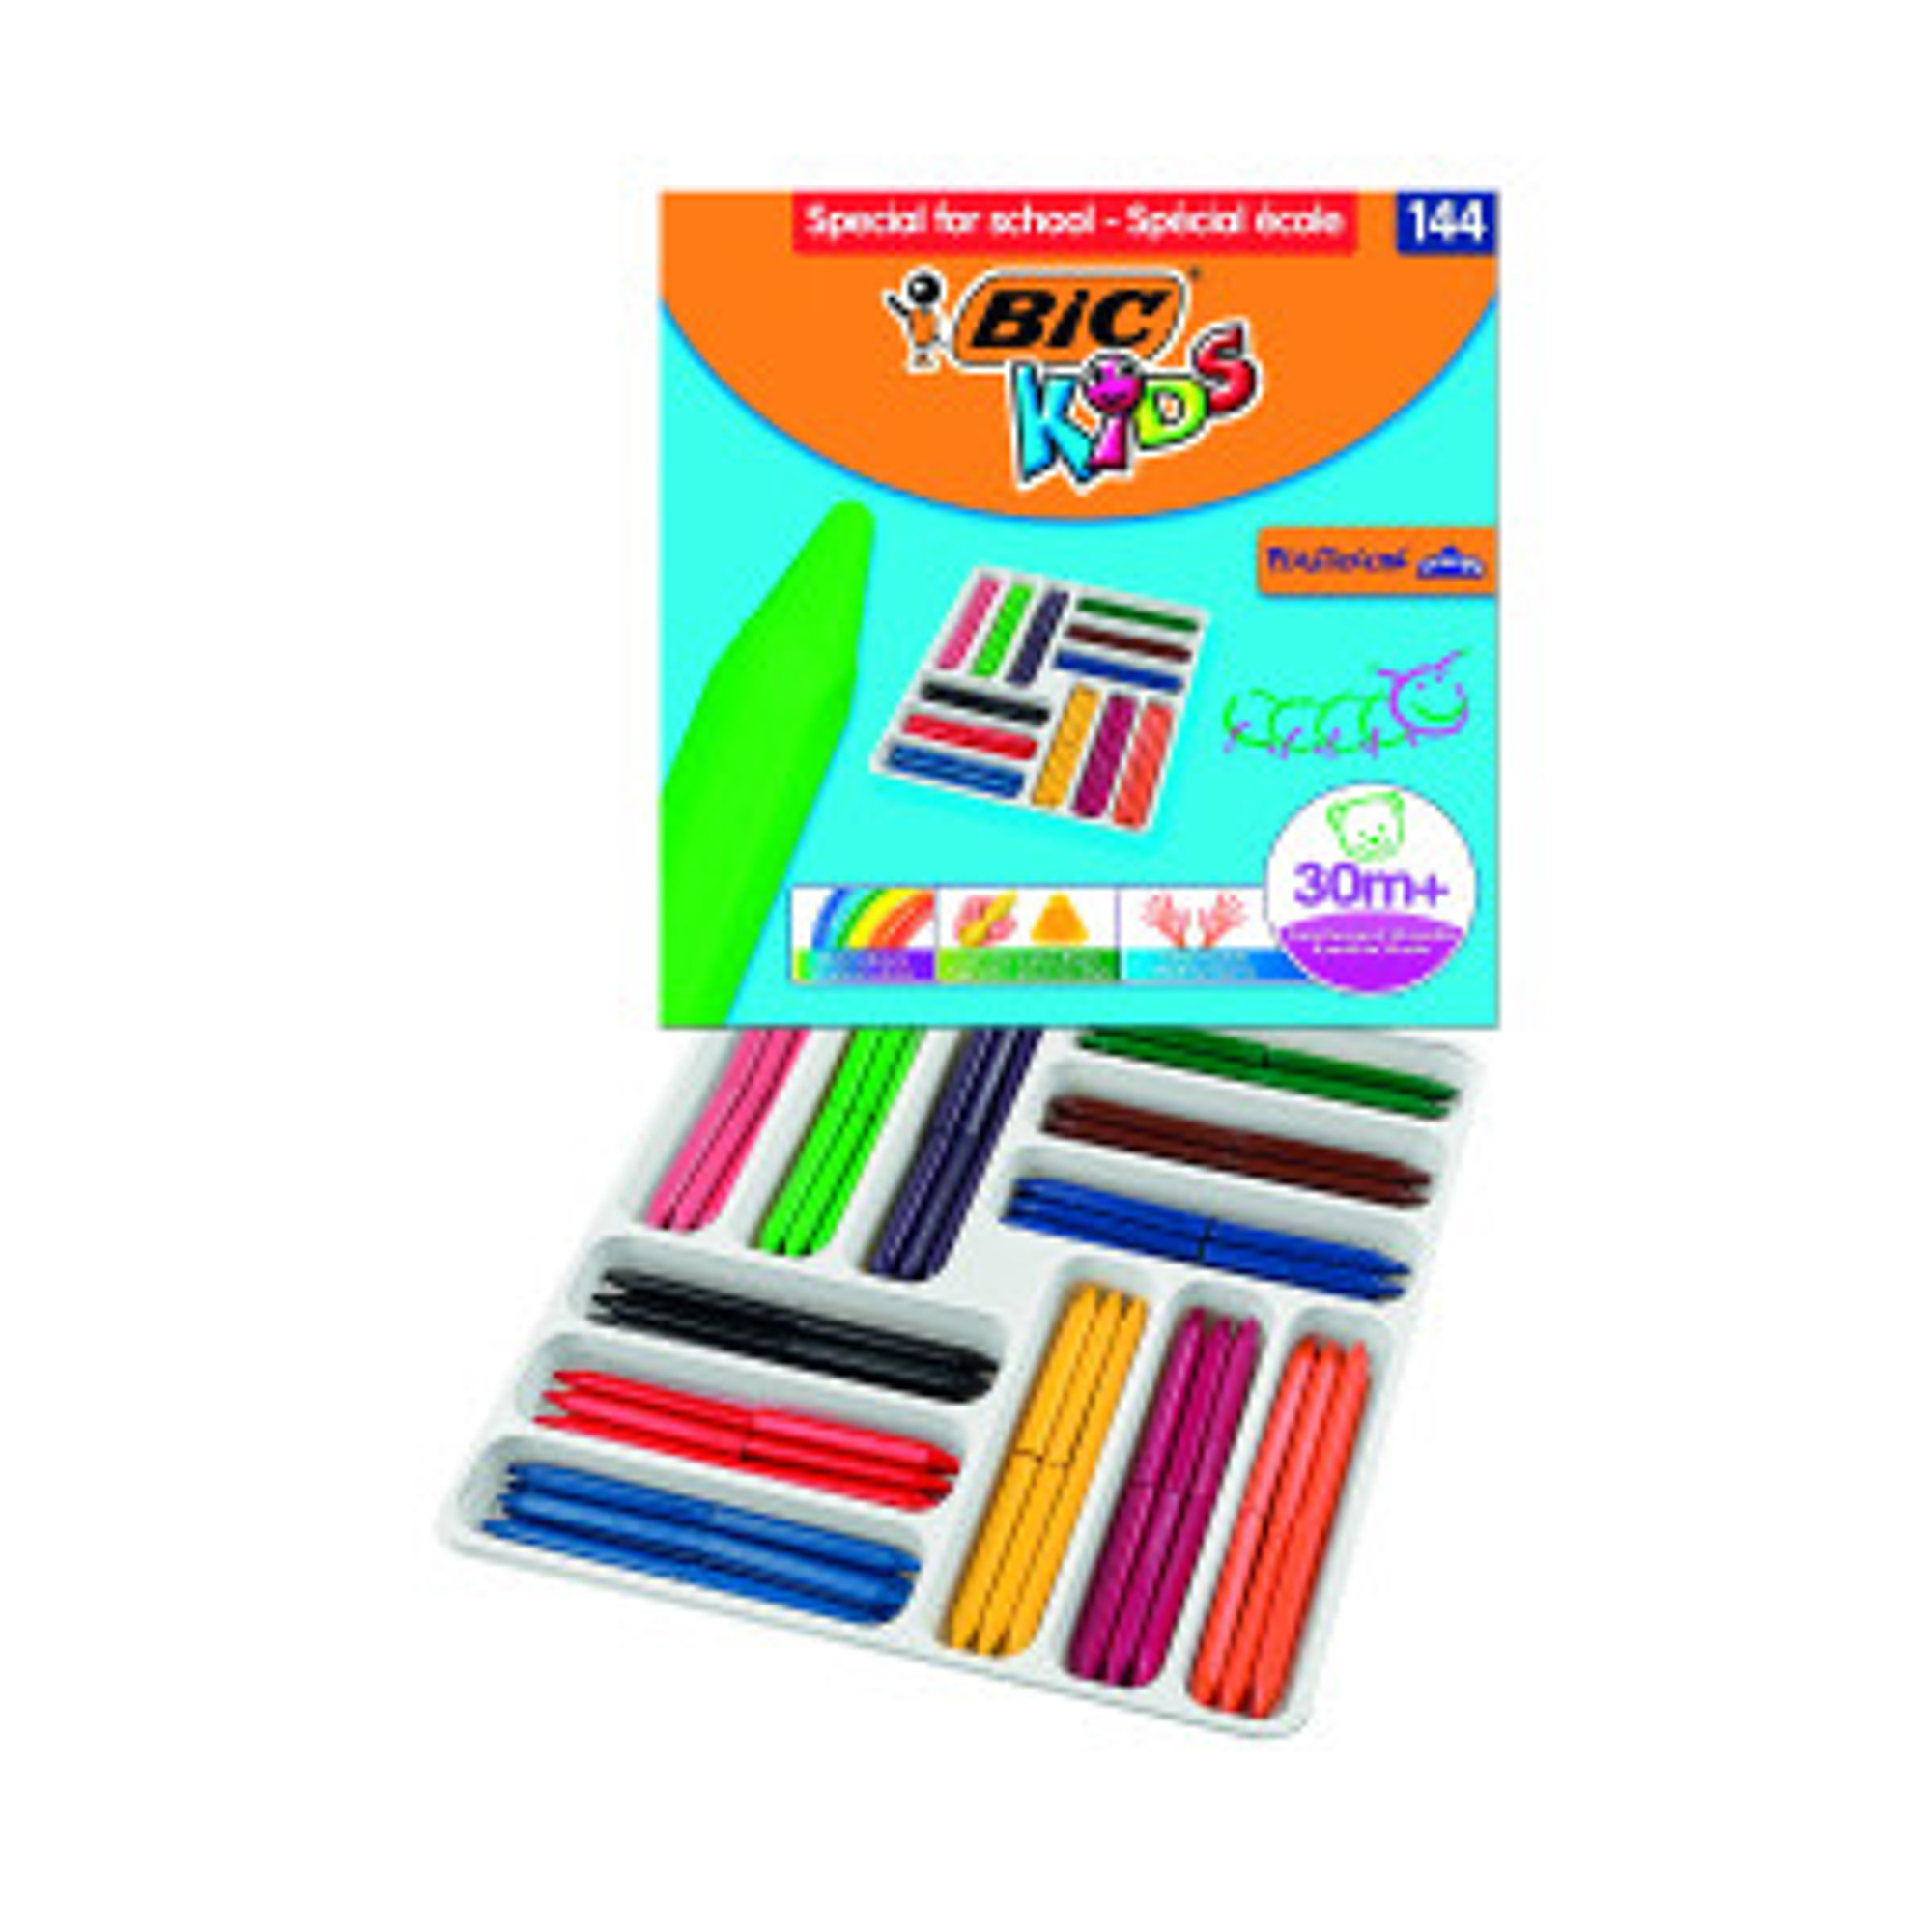 Bic+Kids+Plastidecor+Triangle+Crayons+Assorted+%28Pack+of+144%29+887833